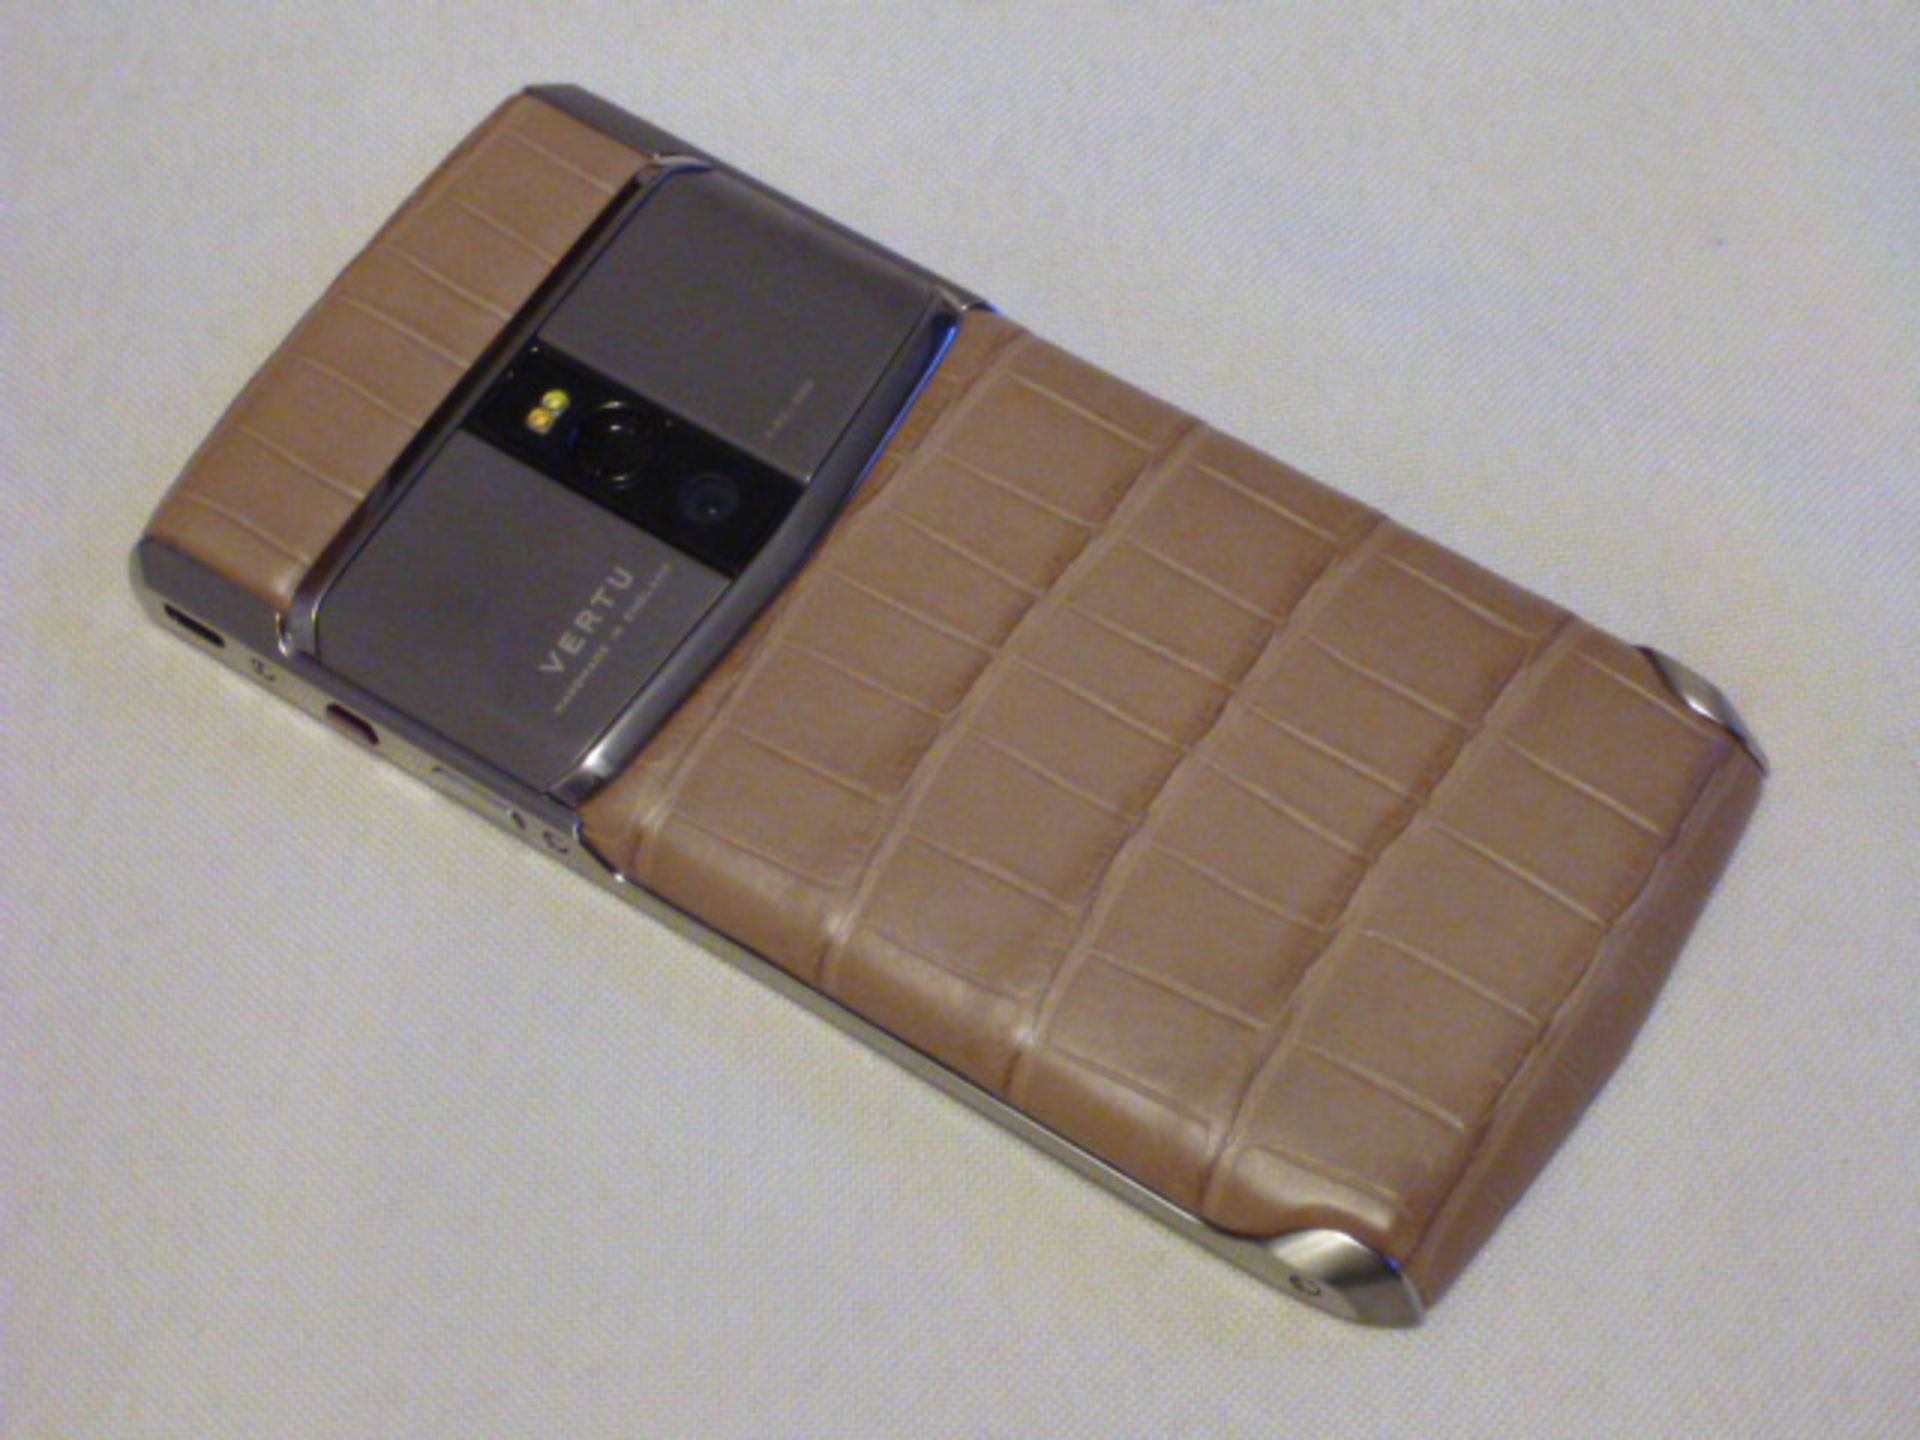 Vertu Signature Touch Phone, Almond Alligator GL2. S/N 3-021609. Comes with Sales Pack, Charging - Image 2 of 2